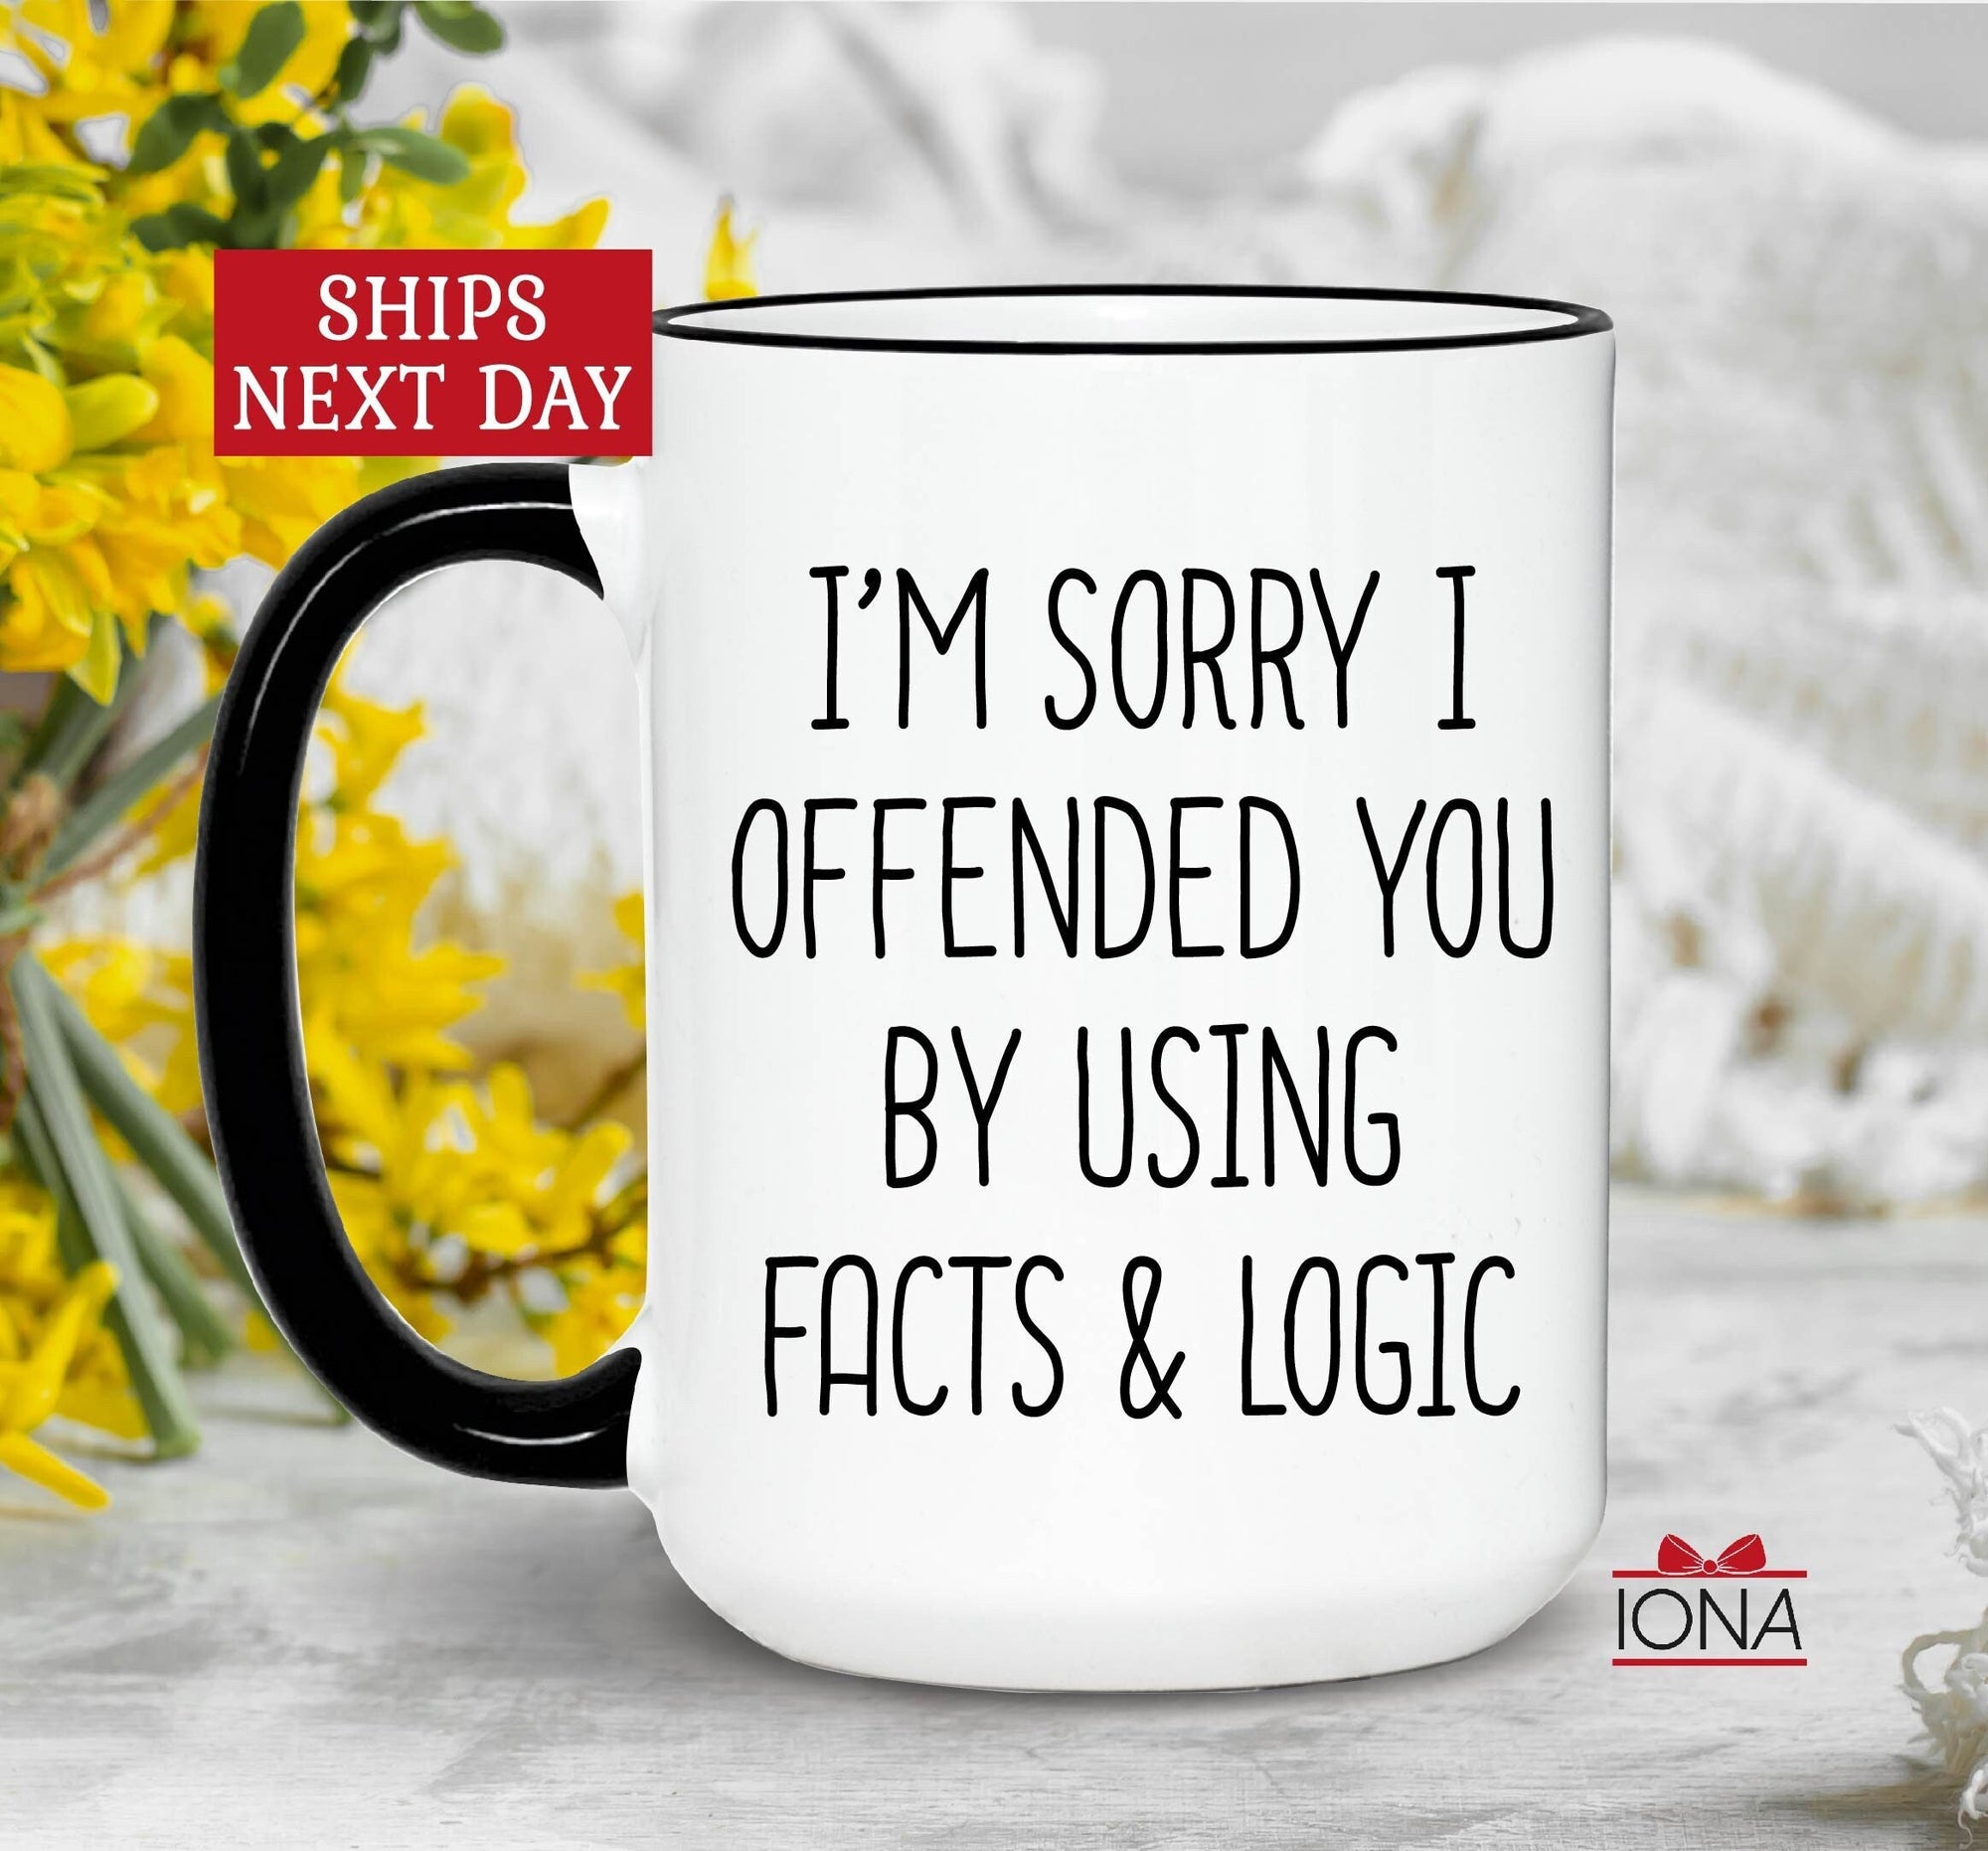 Sarcastic Coffee Mug, Funny Morning Tea Cup, Mugs With Sayings, I'm sorry I offended you using facts & logic great gift for friends family